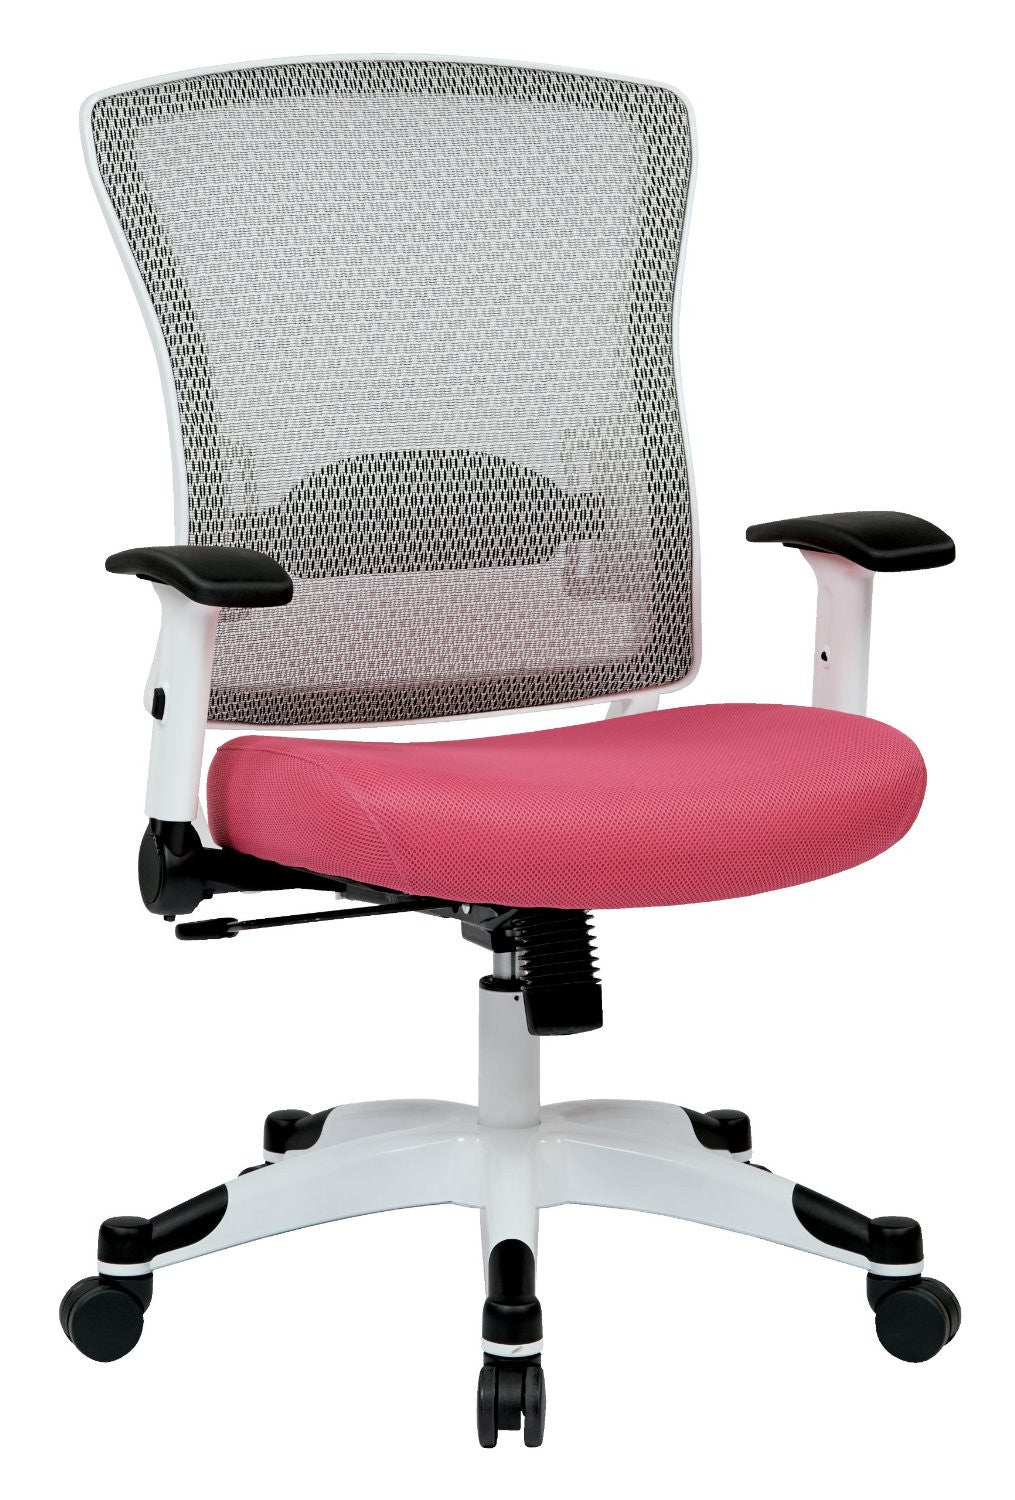 Space Seating 317w-w1c1f2w-261 White Frame Managers Chair (pink)